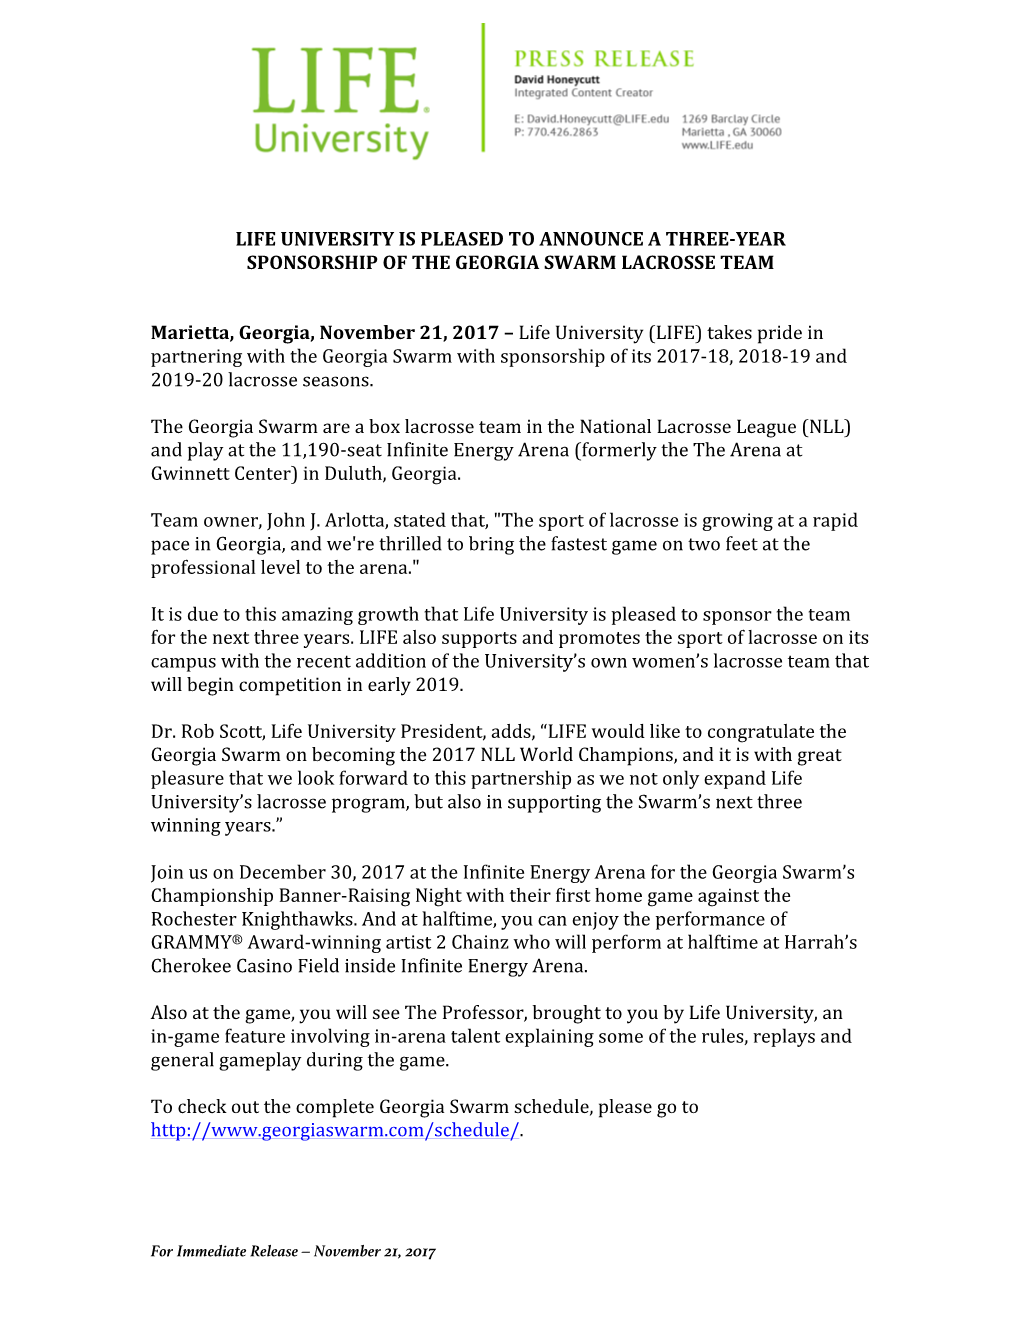 Life University Is Pleased to Announce a Three-Year Sponsorship of the Georgia Swarm Lacrosse Team